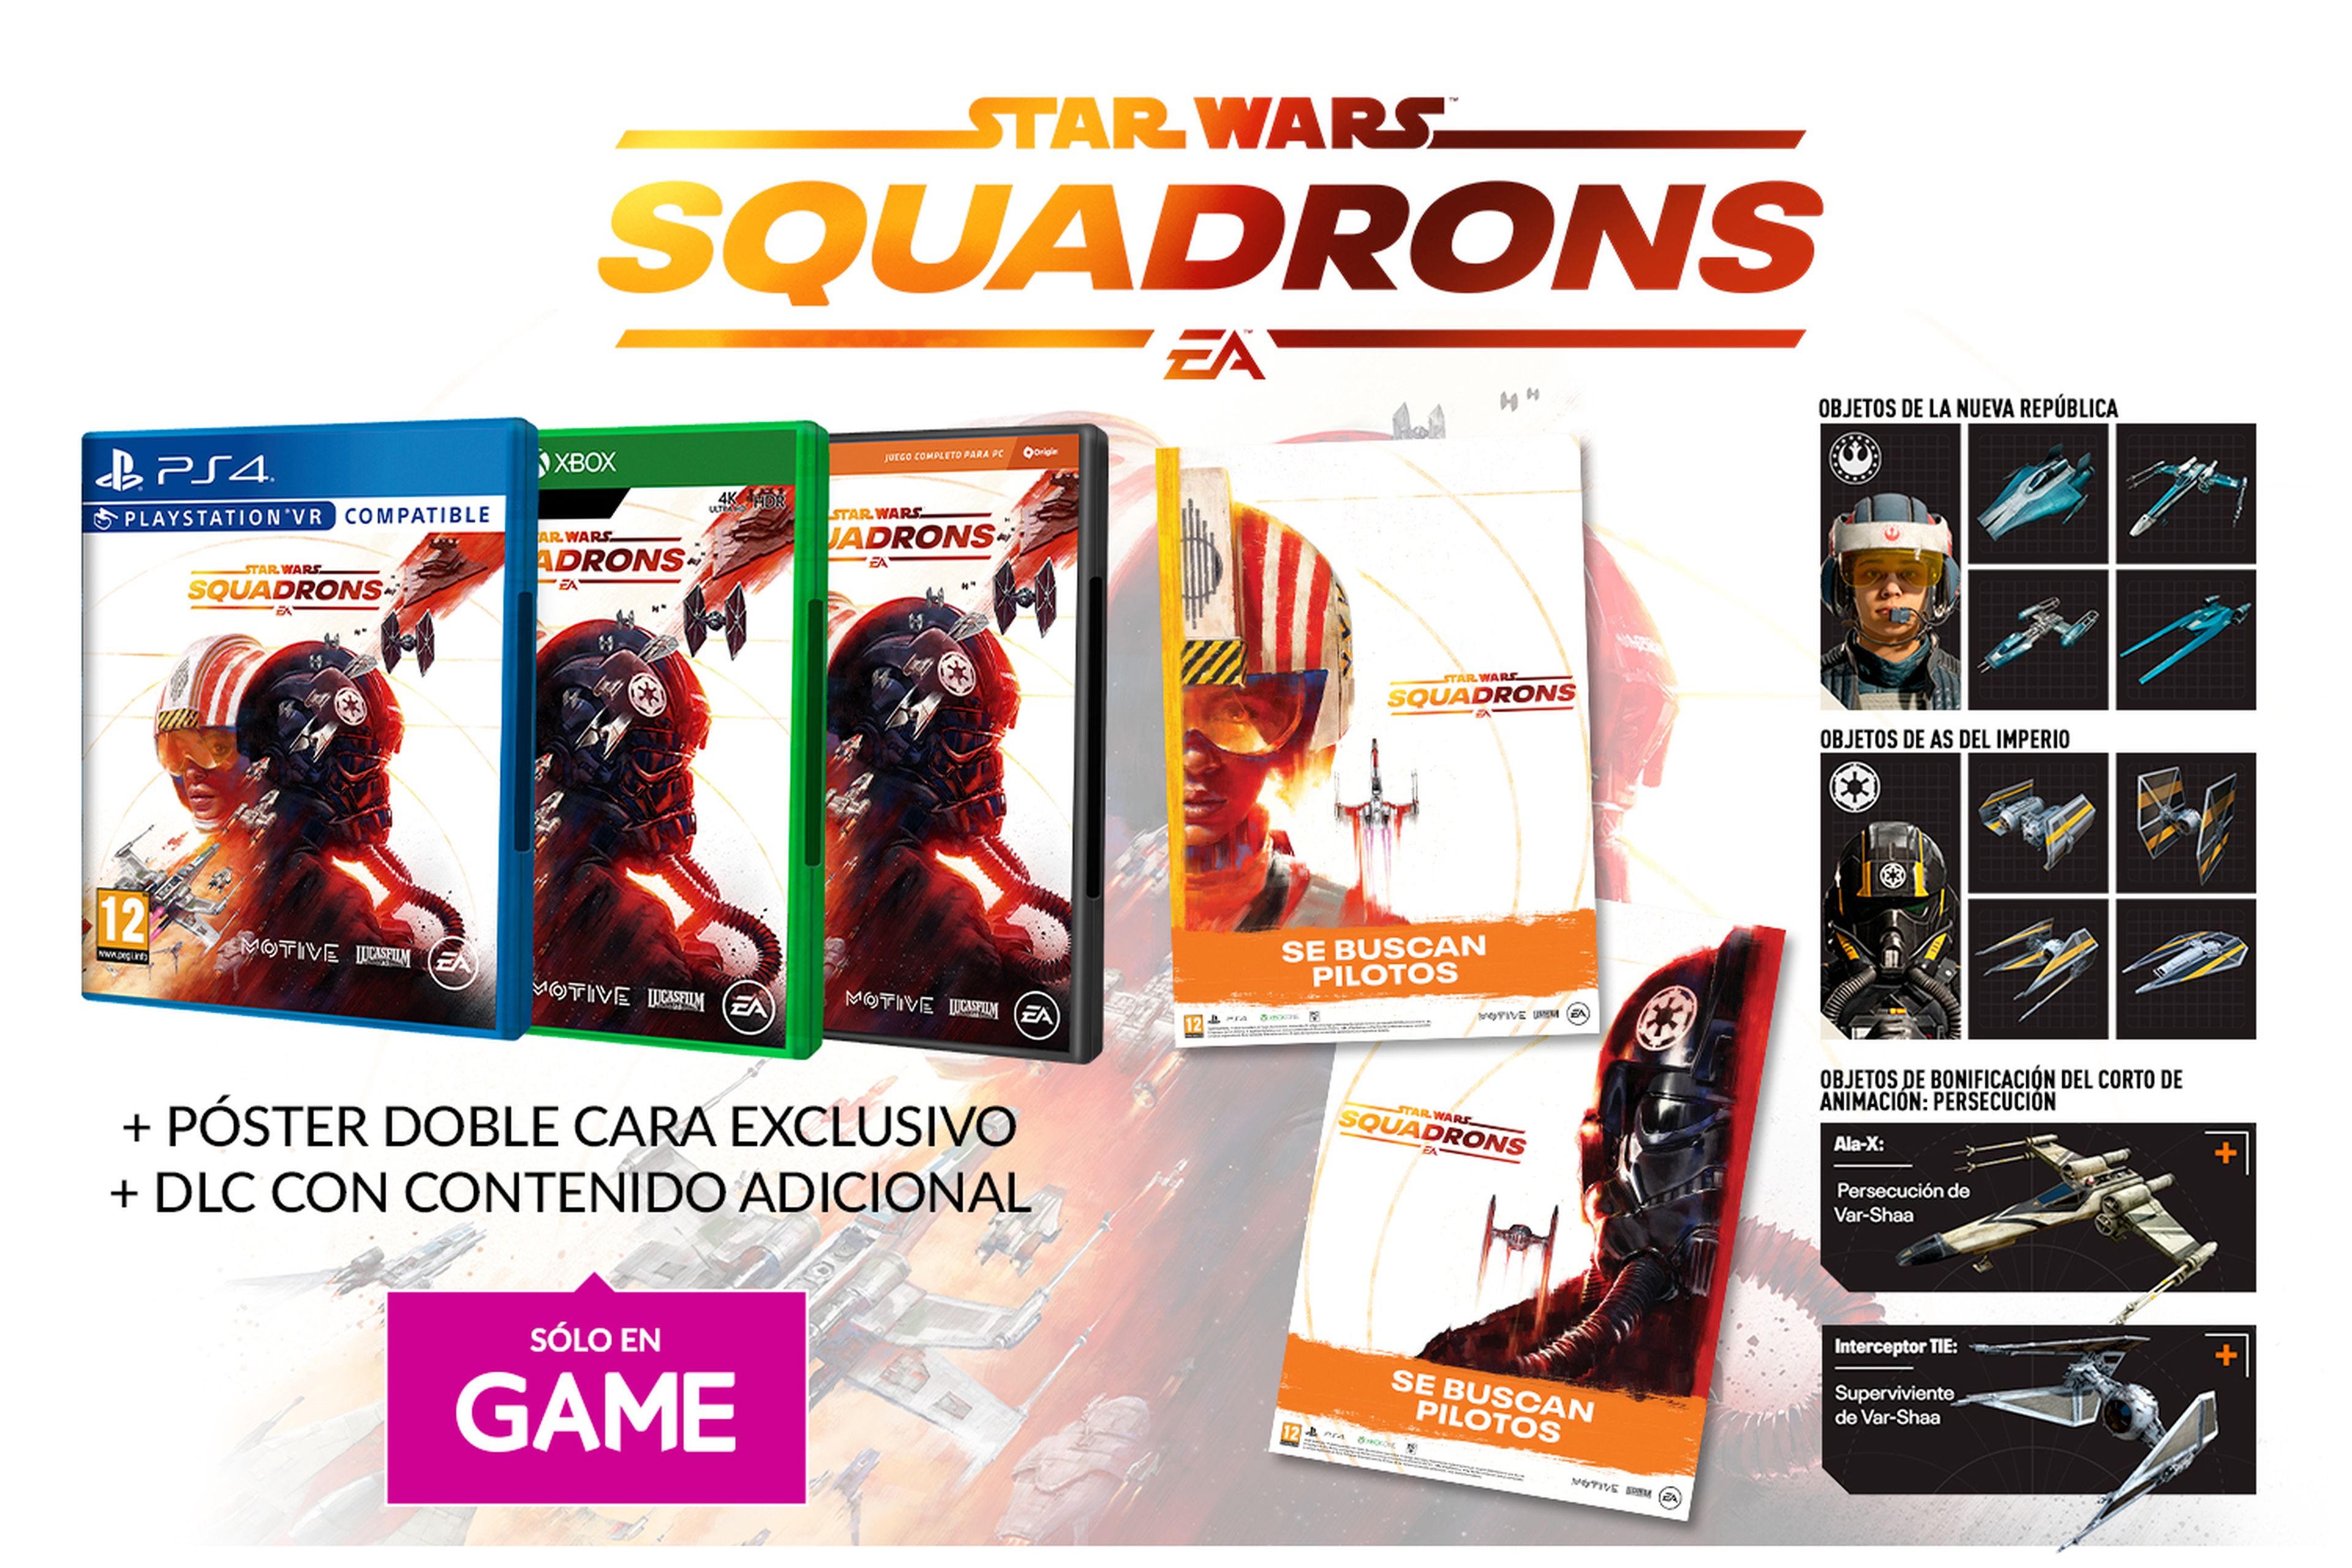 Star Wars Squadrons GAME